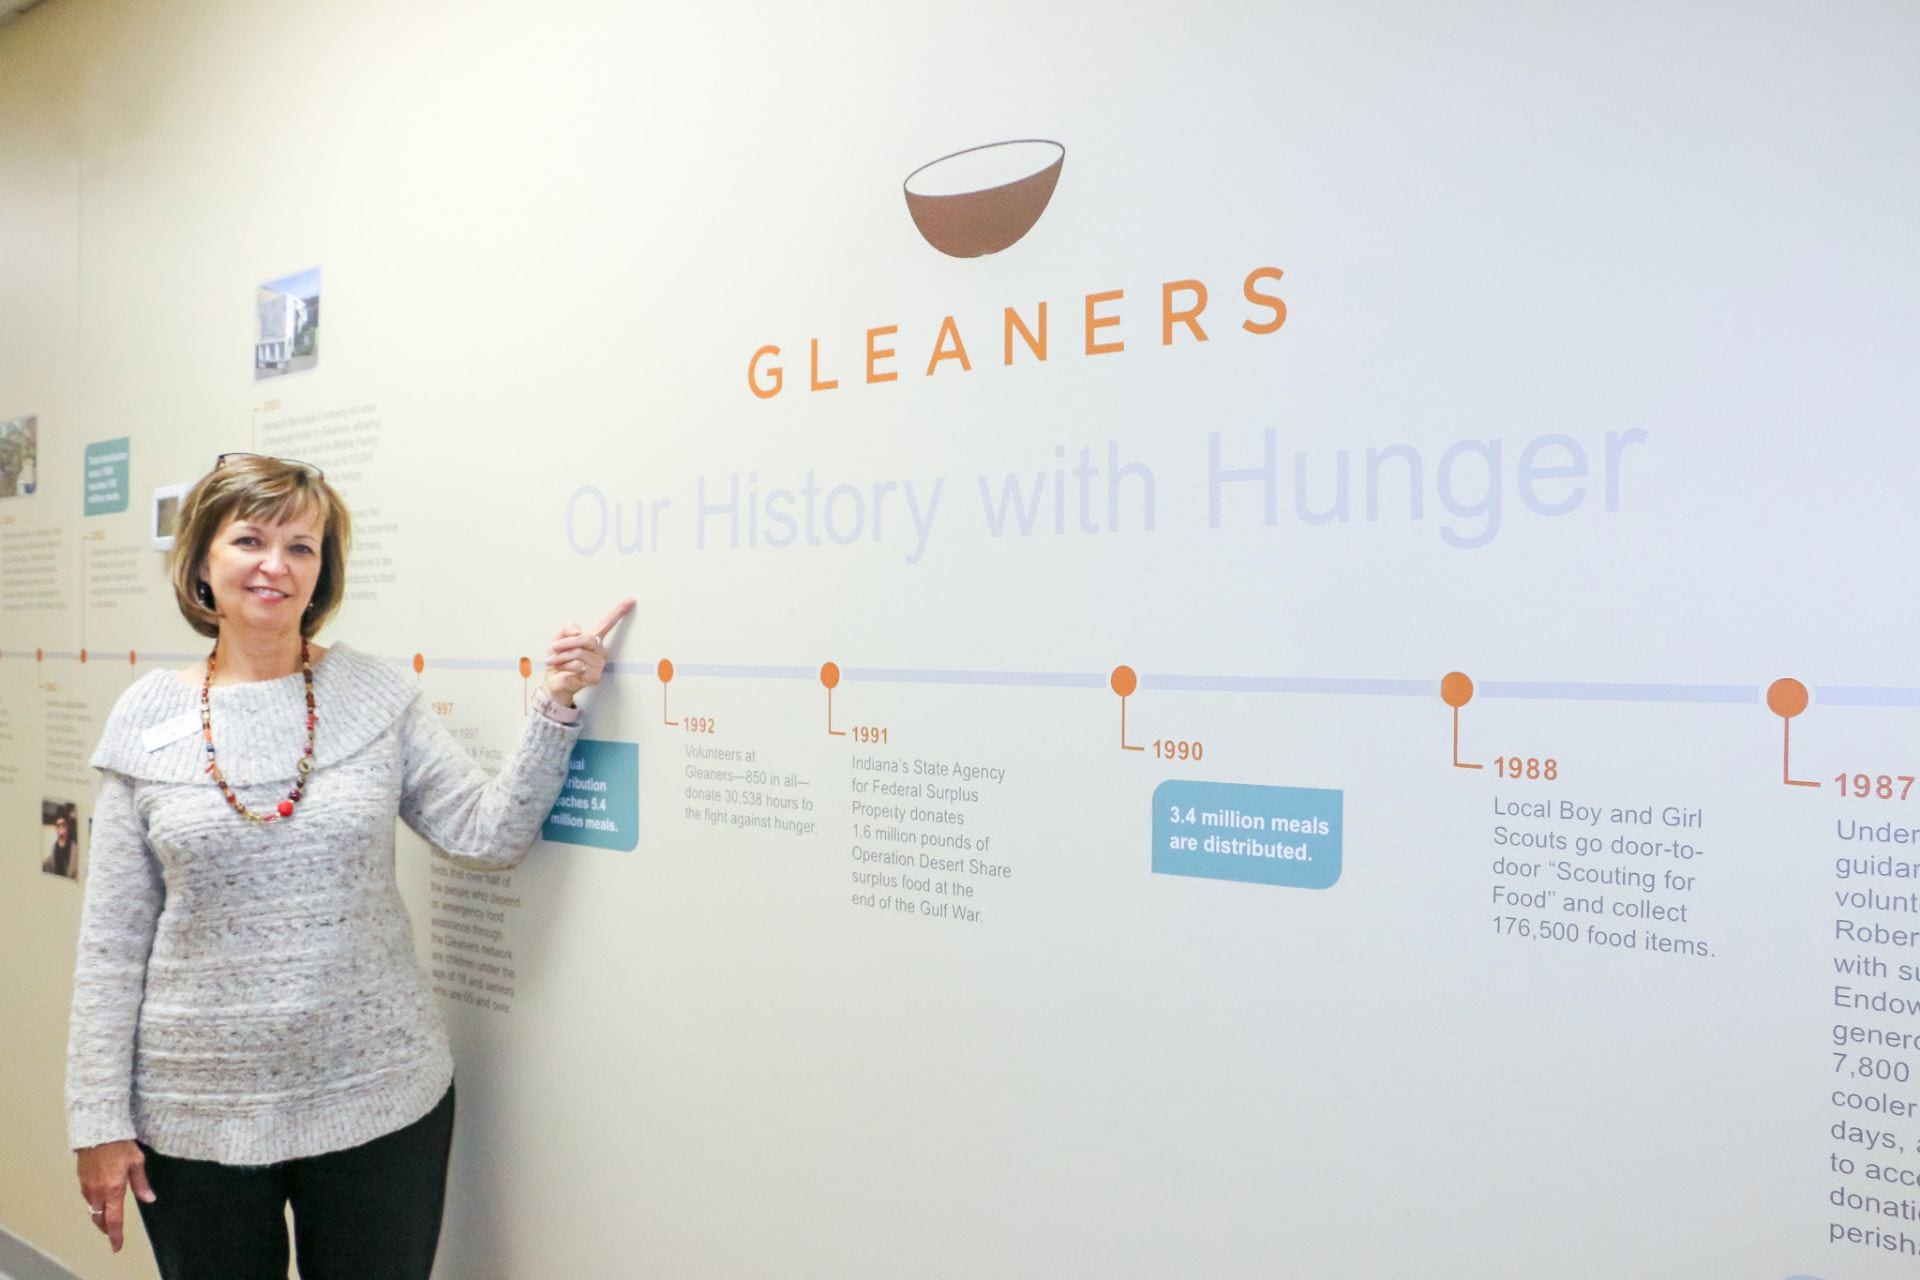 Debbie Russell at Gleaners Food Bank of Indiana